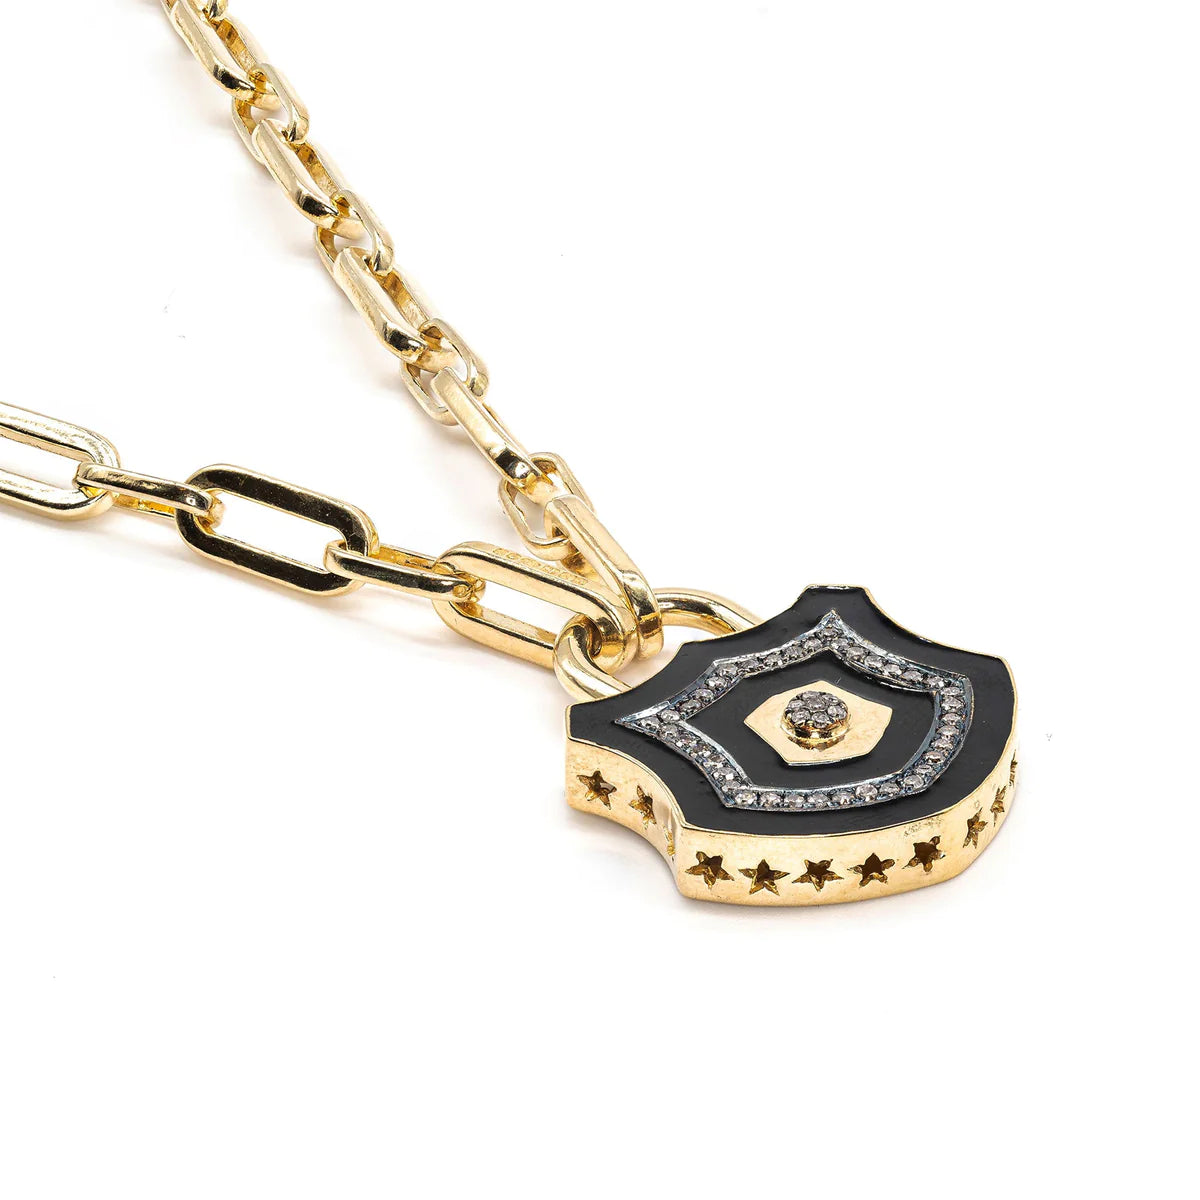 Black enamel lock with diamonds on a chunky gold chain